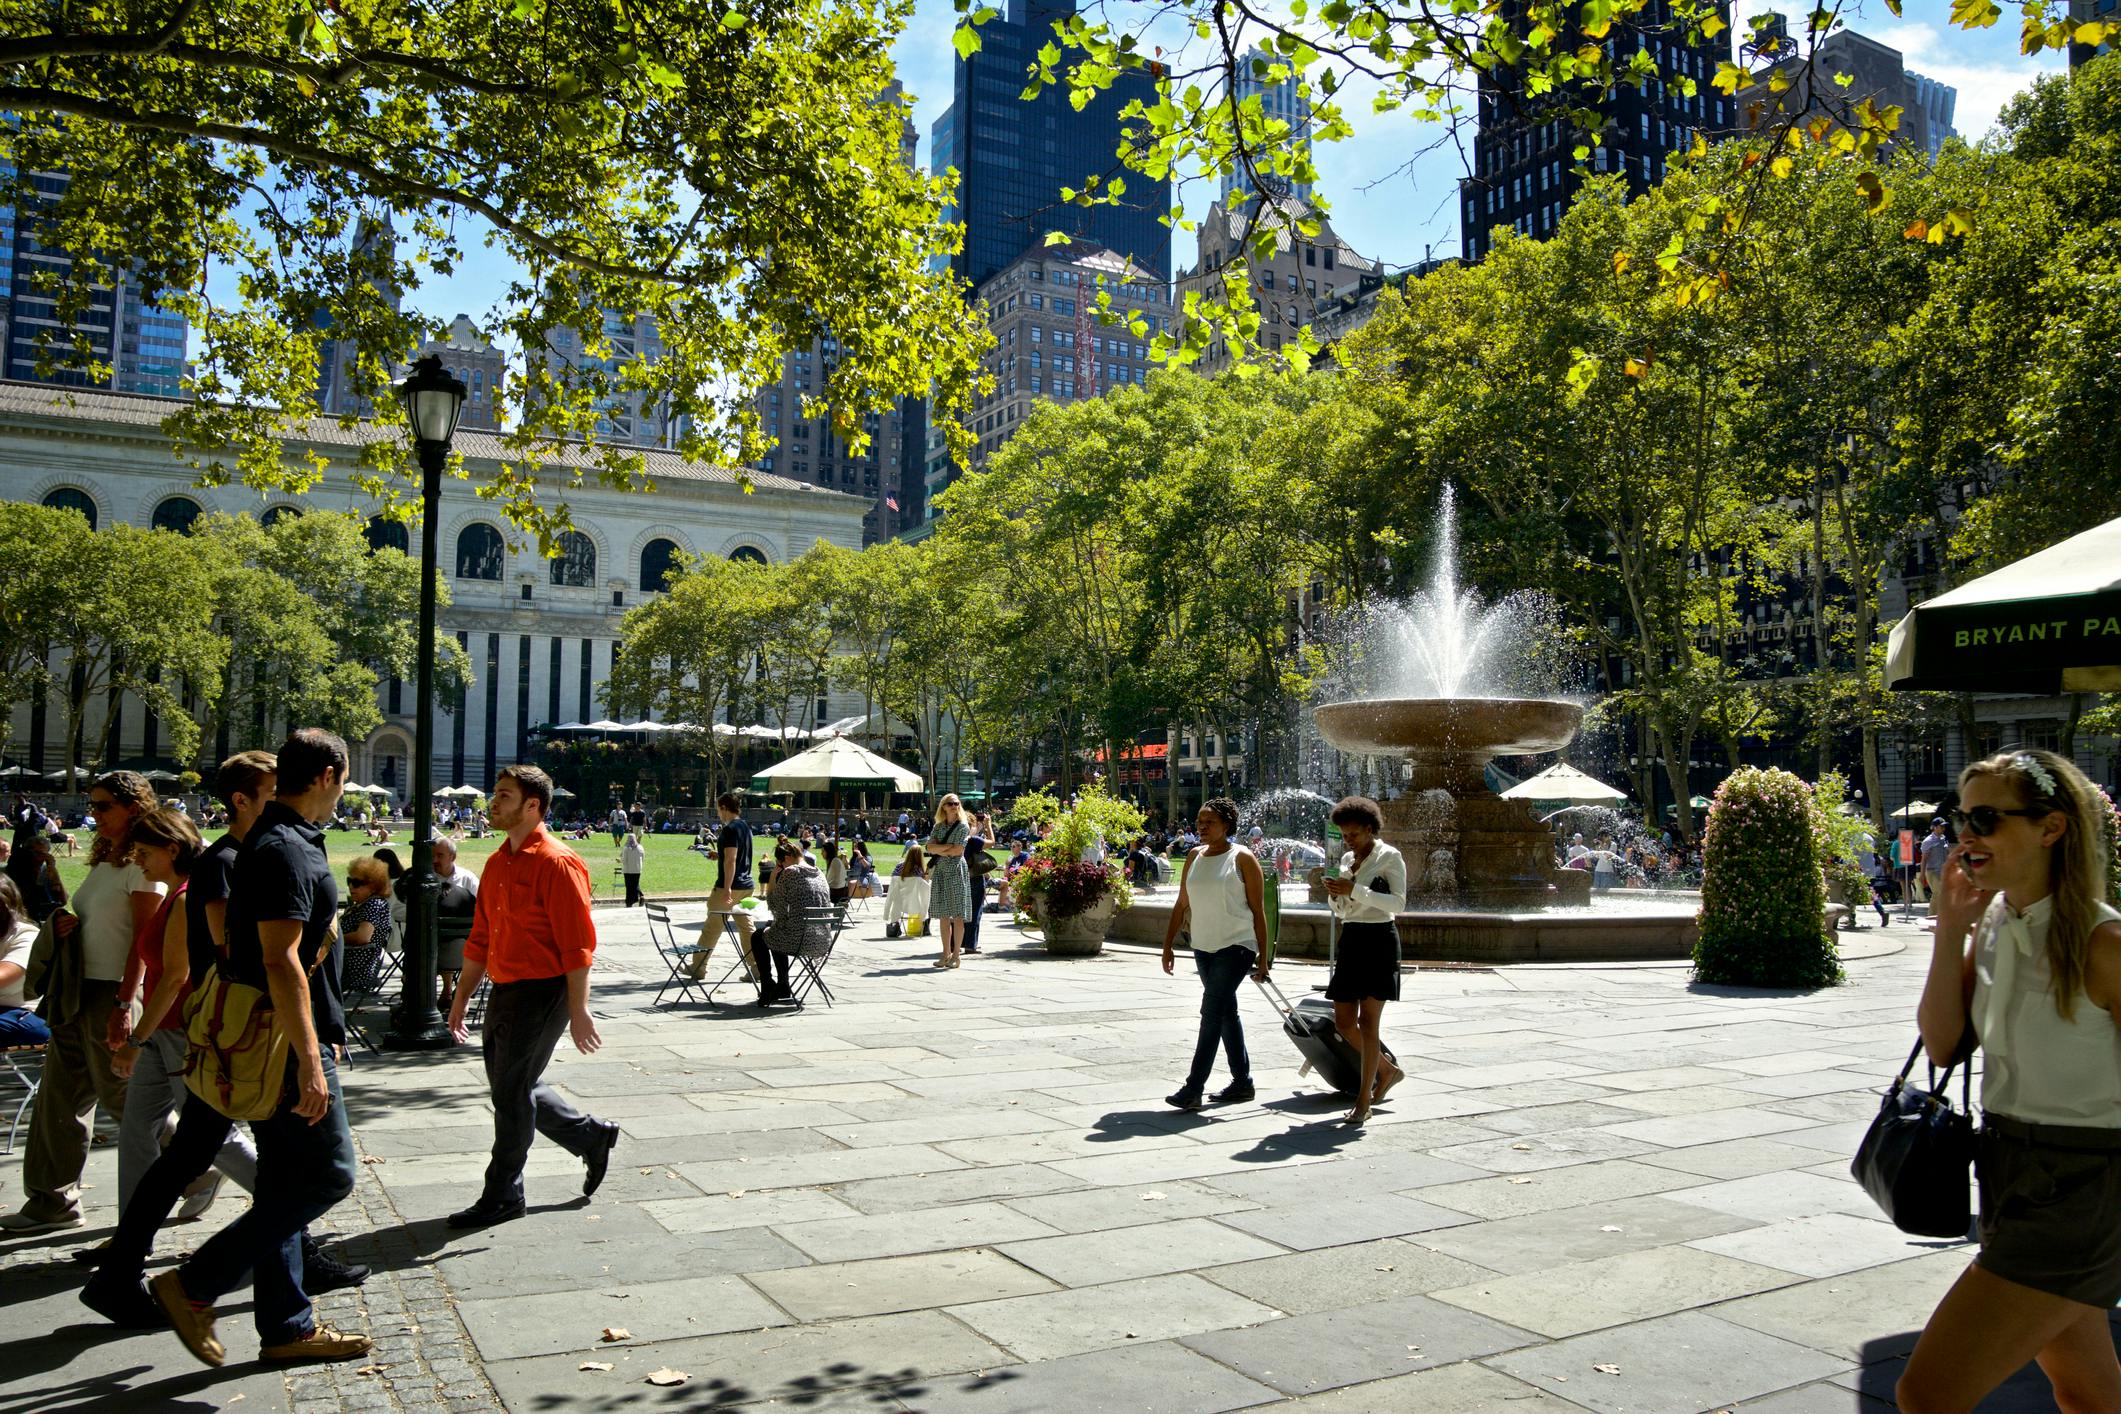 Bryant Park, New York City, 2015. Photo by Jay Lazarin/Getty Images.